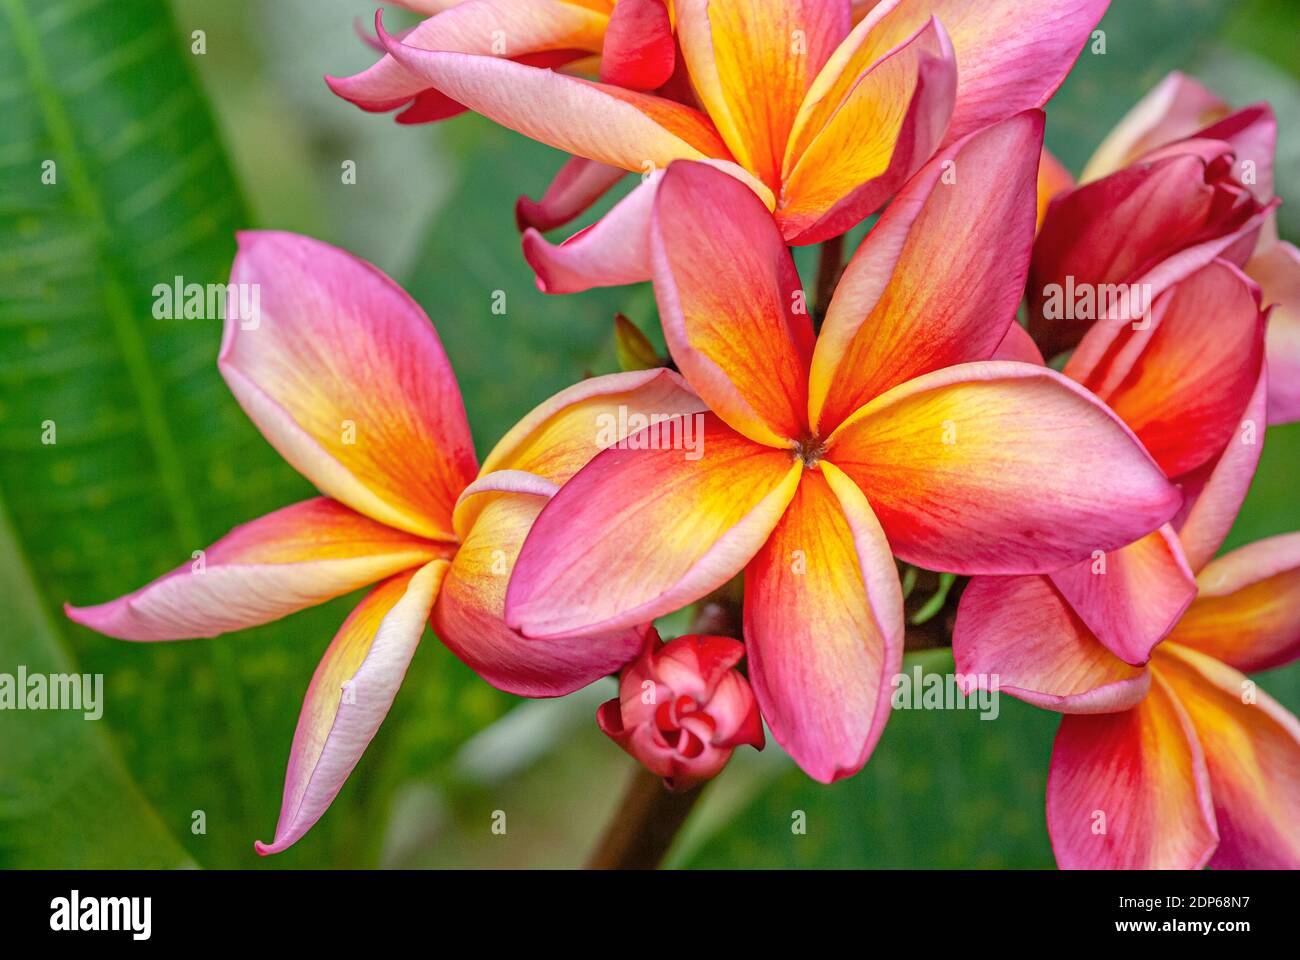 Closeup of red and yellow colored Frangipani Flowers on a tree Stock Photo